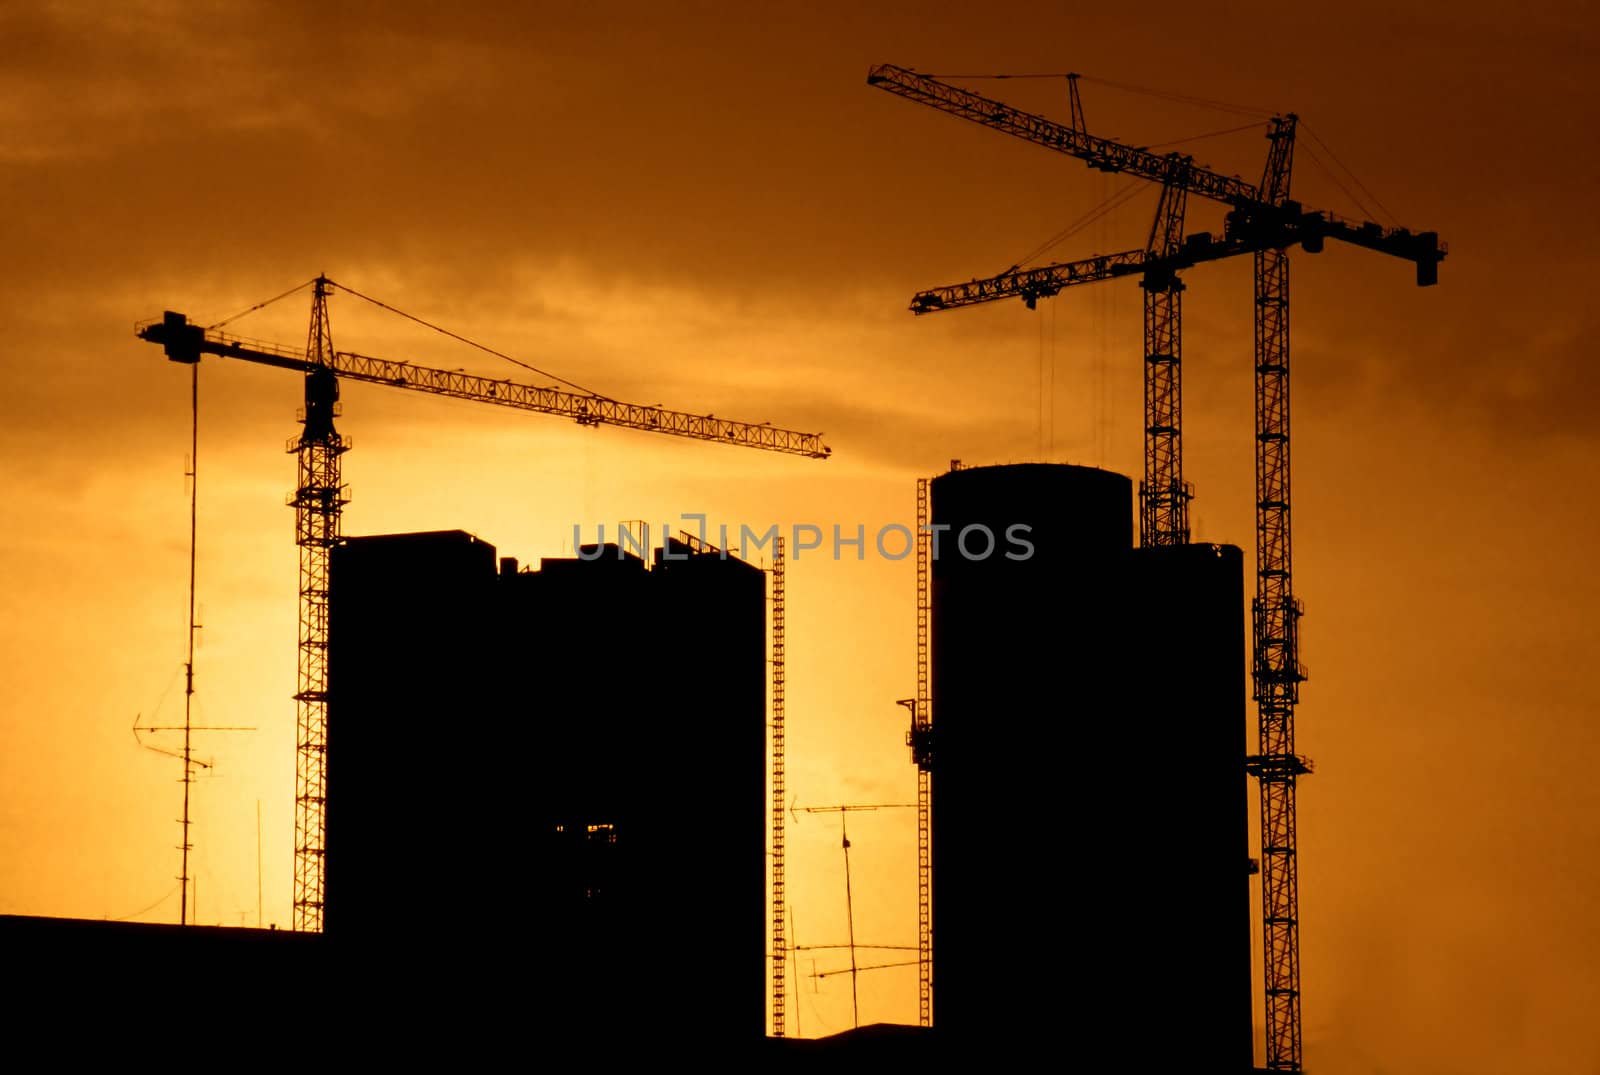 Two buildings going up as sun is setting